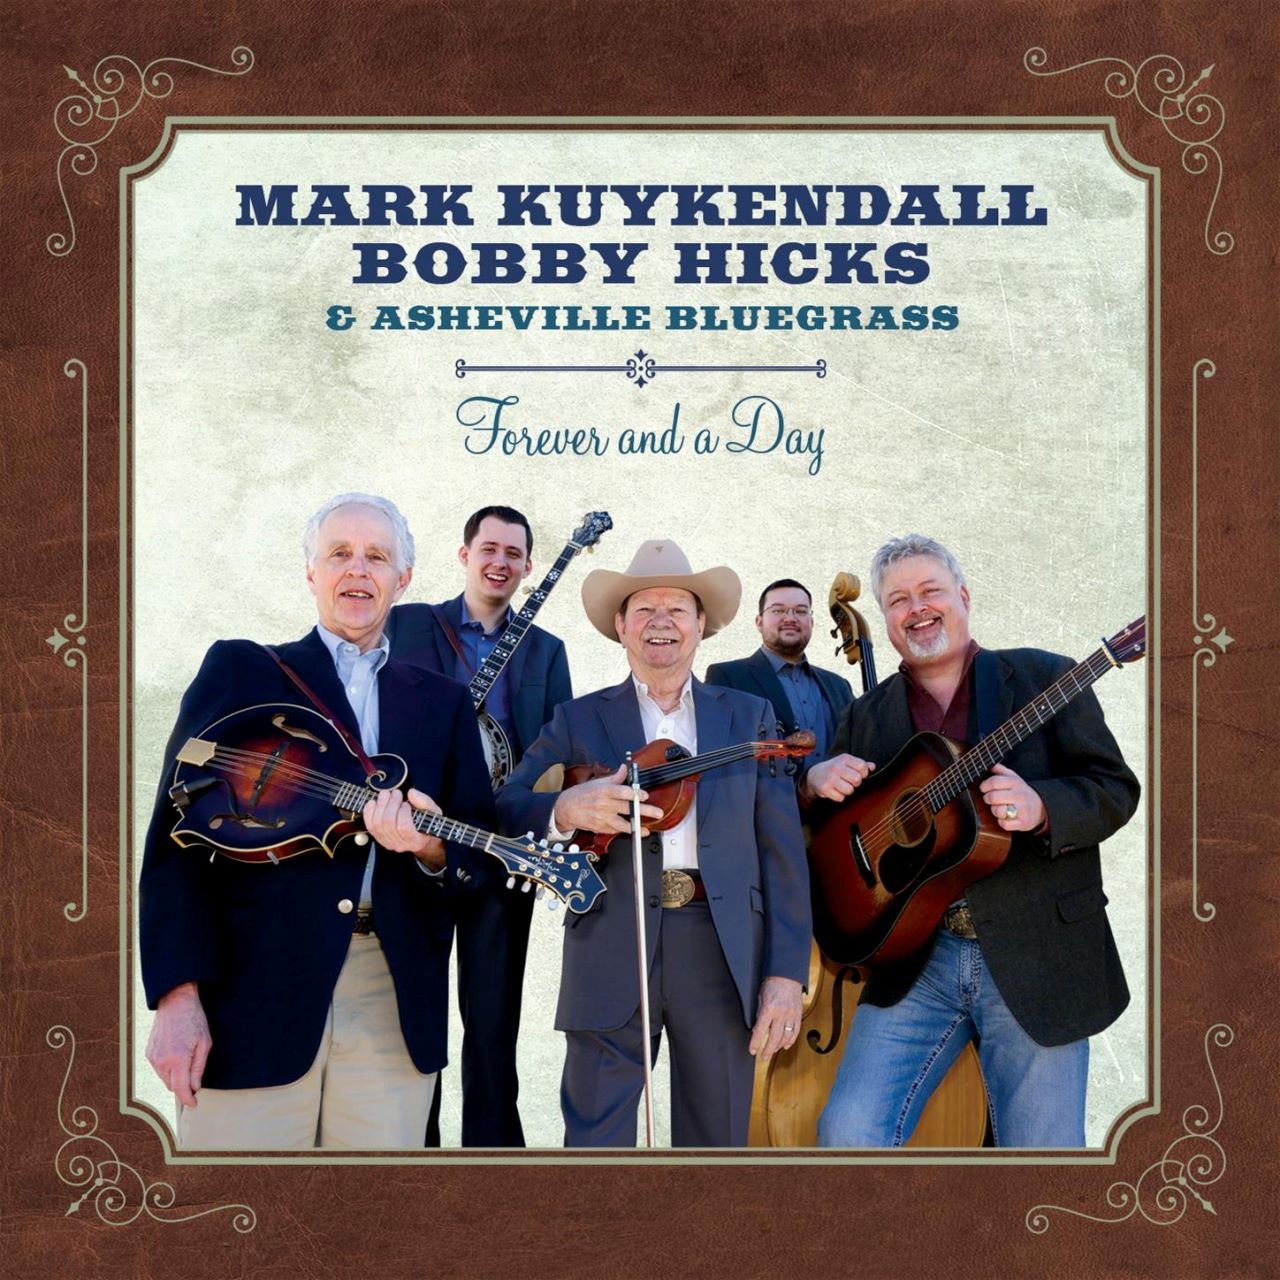 Mark Kuykendall & Bobby Hicks - Forever And A Day cover album